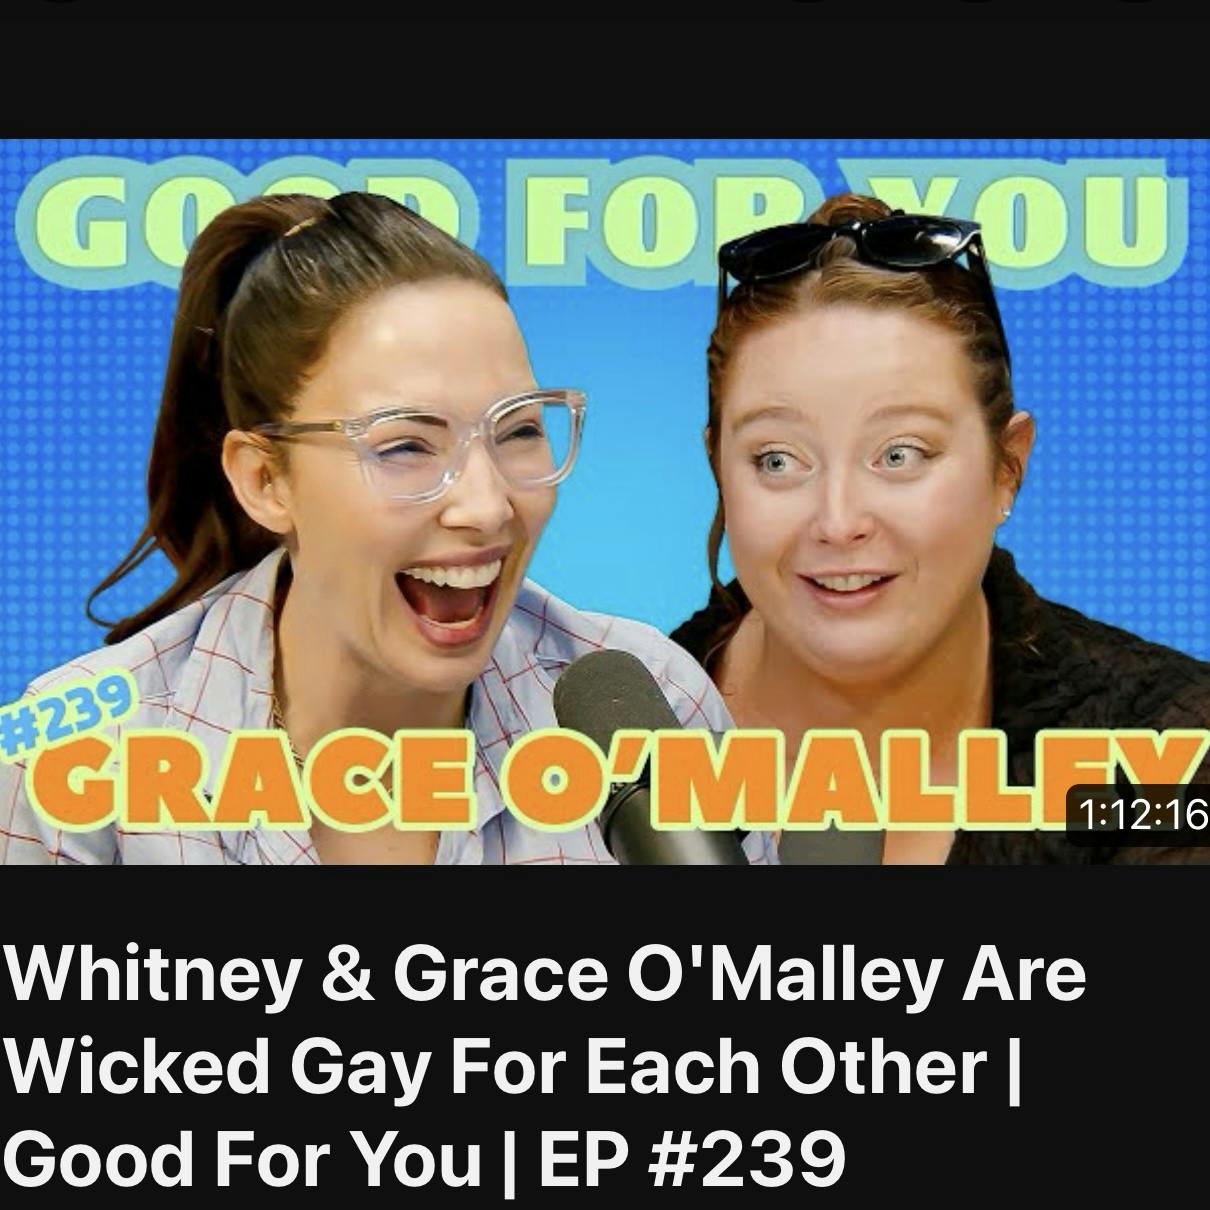 Whitney & Grace O'Malley Are Wicked Gay For Each Other